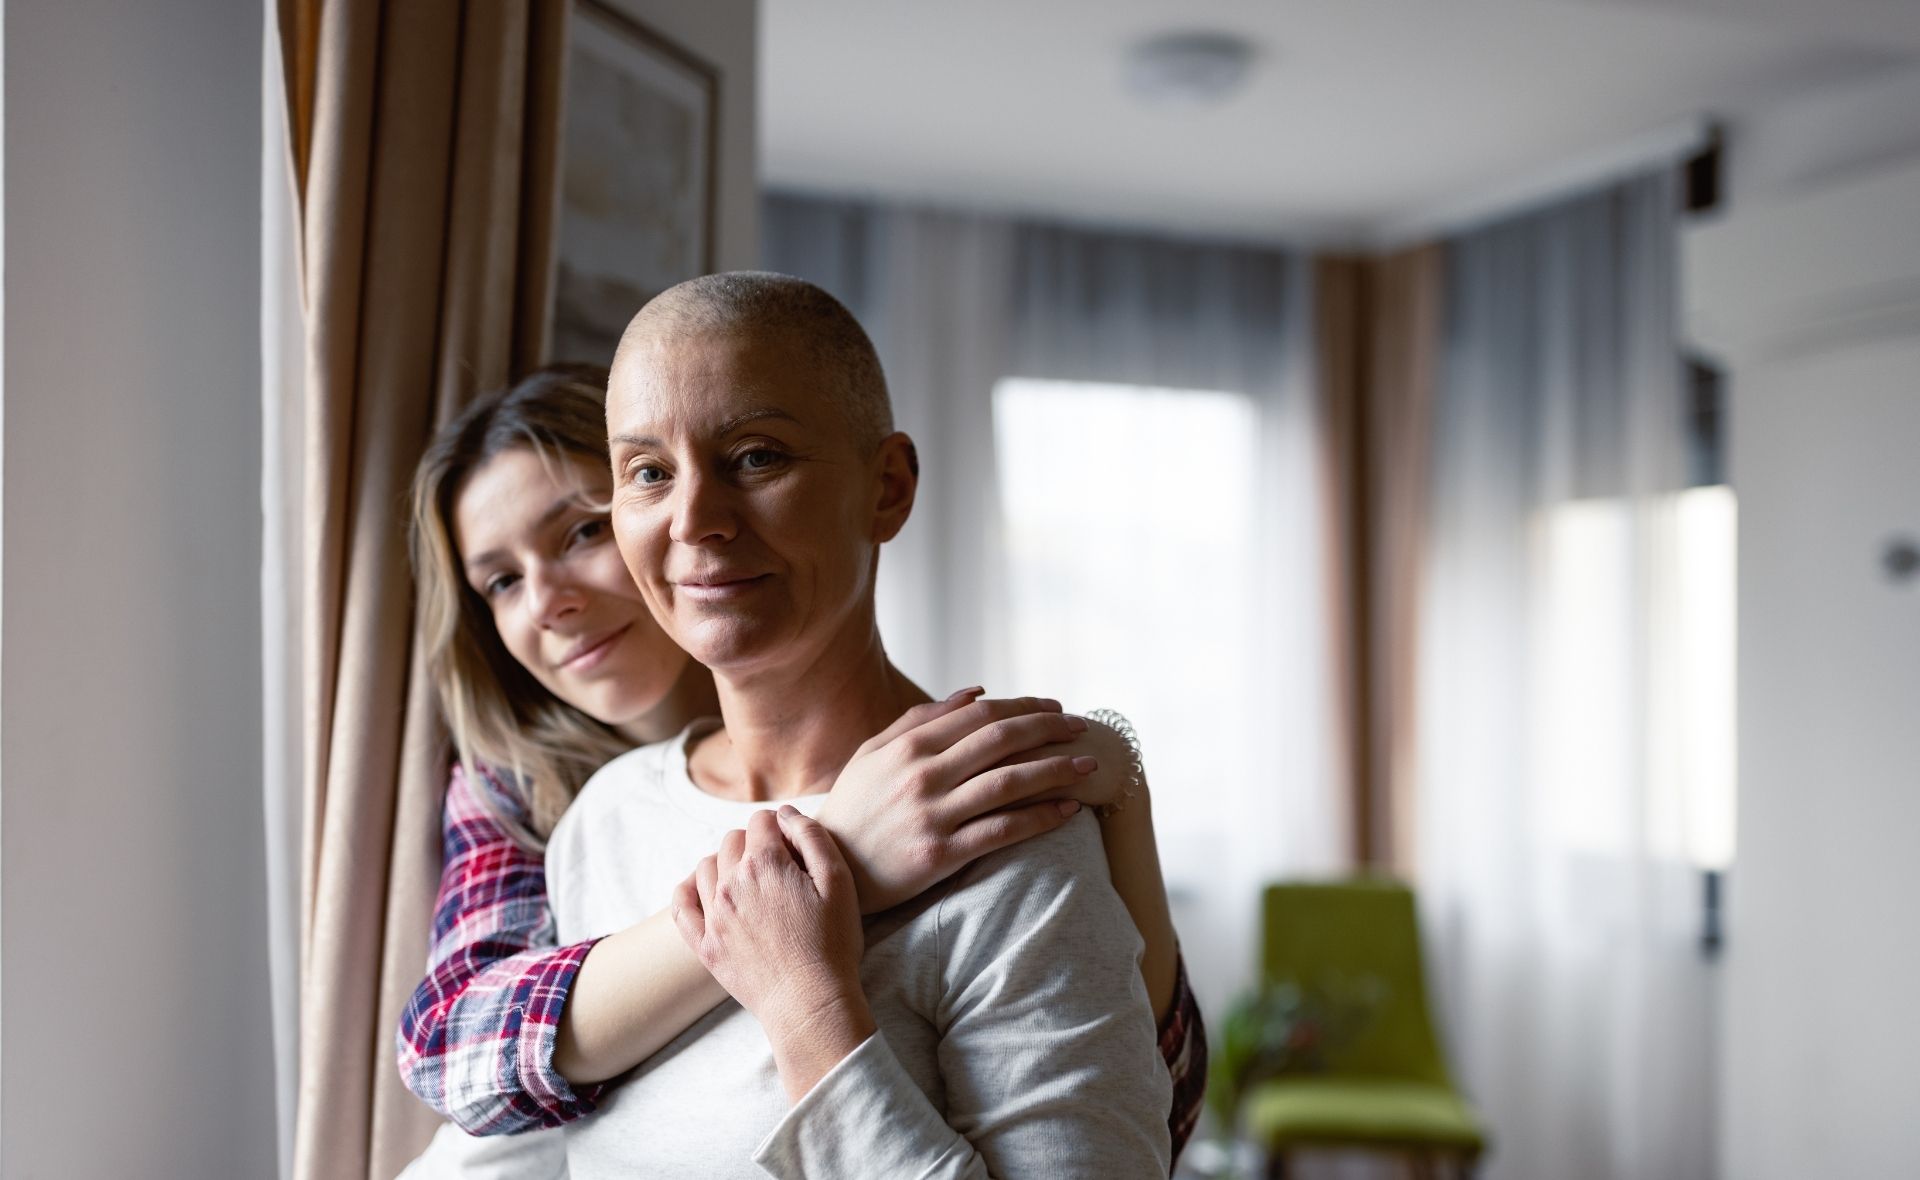 Dealing with the fear of sickness as a cancer survivor